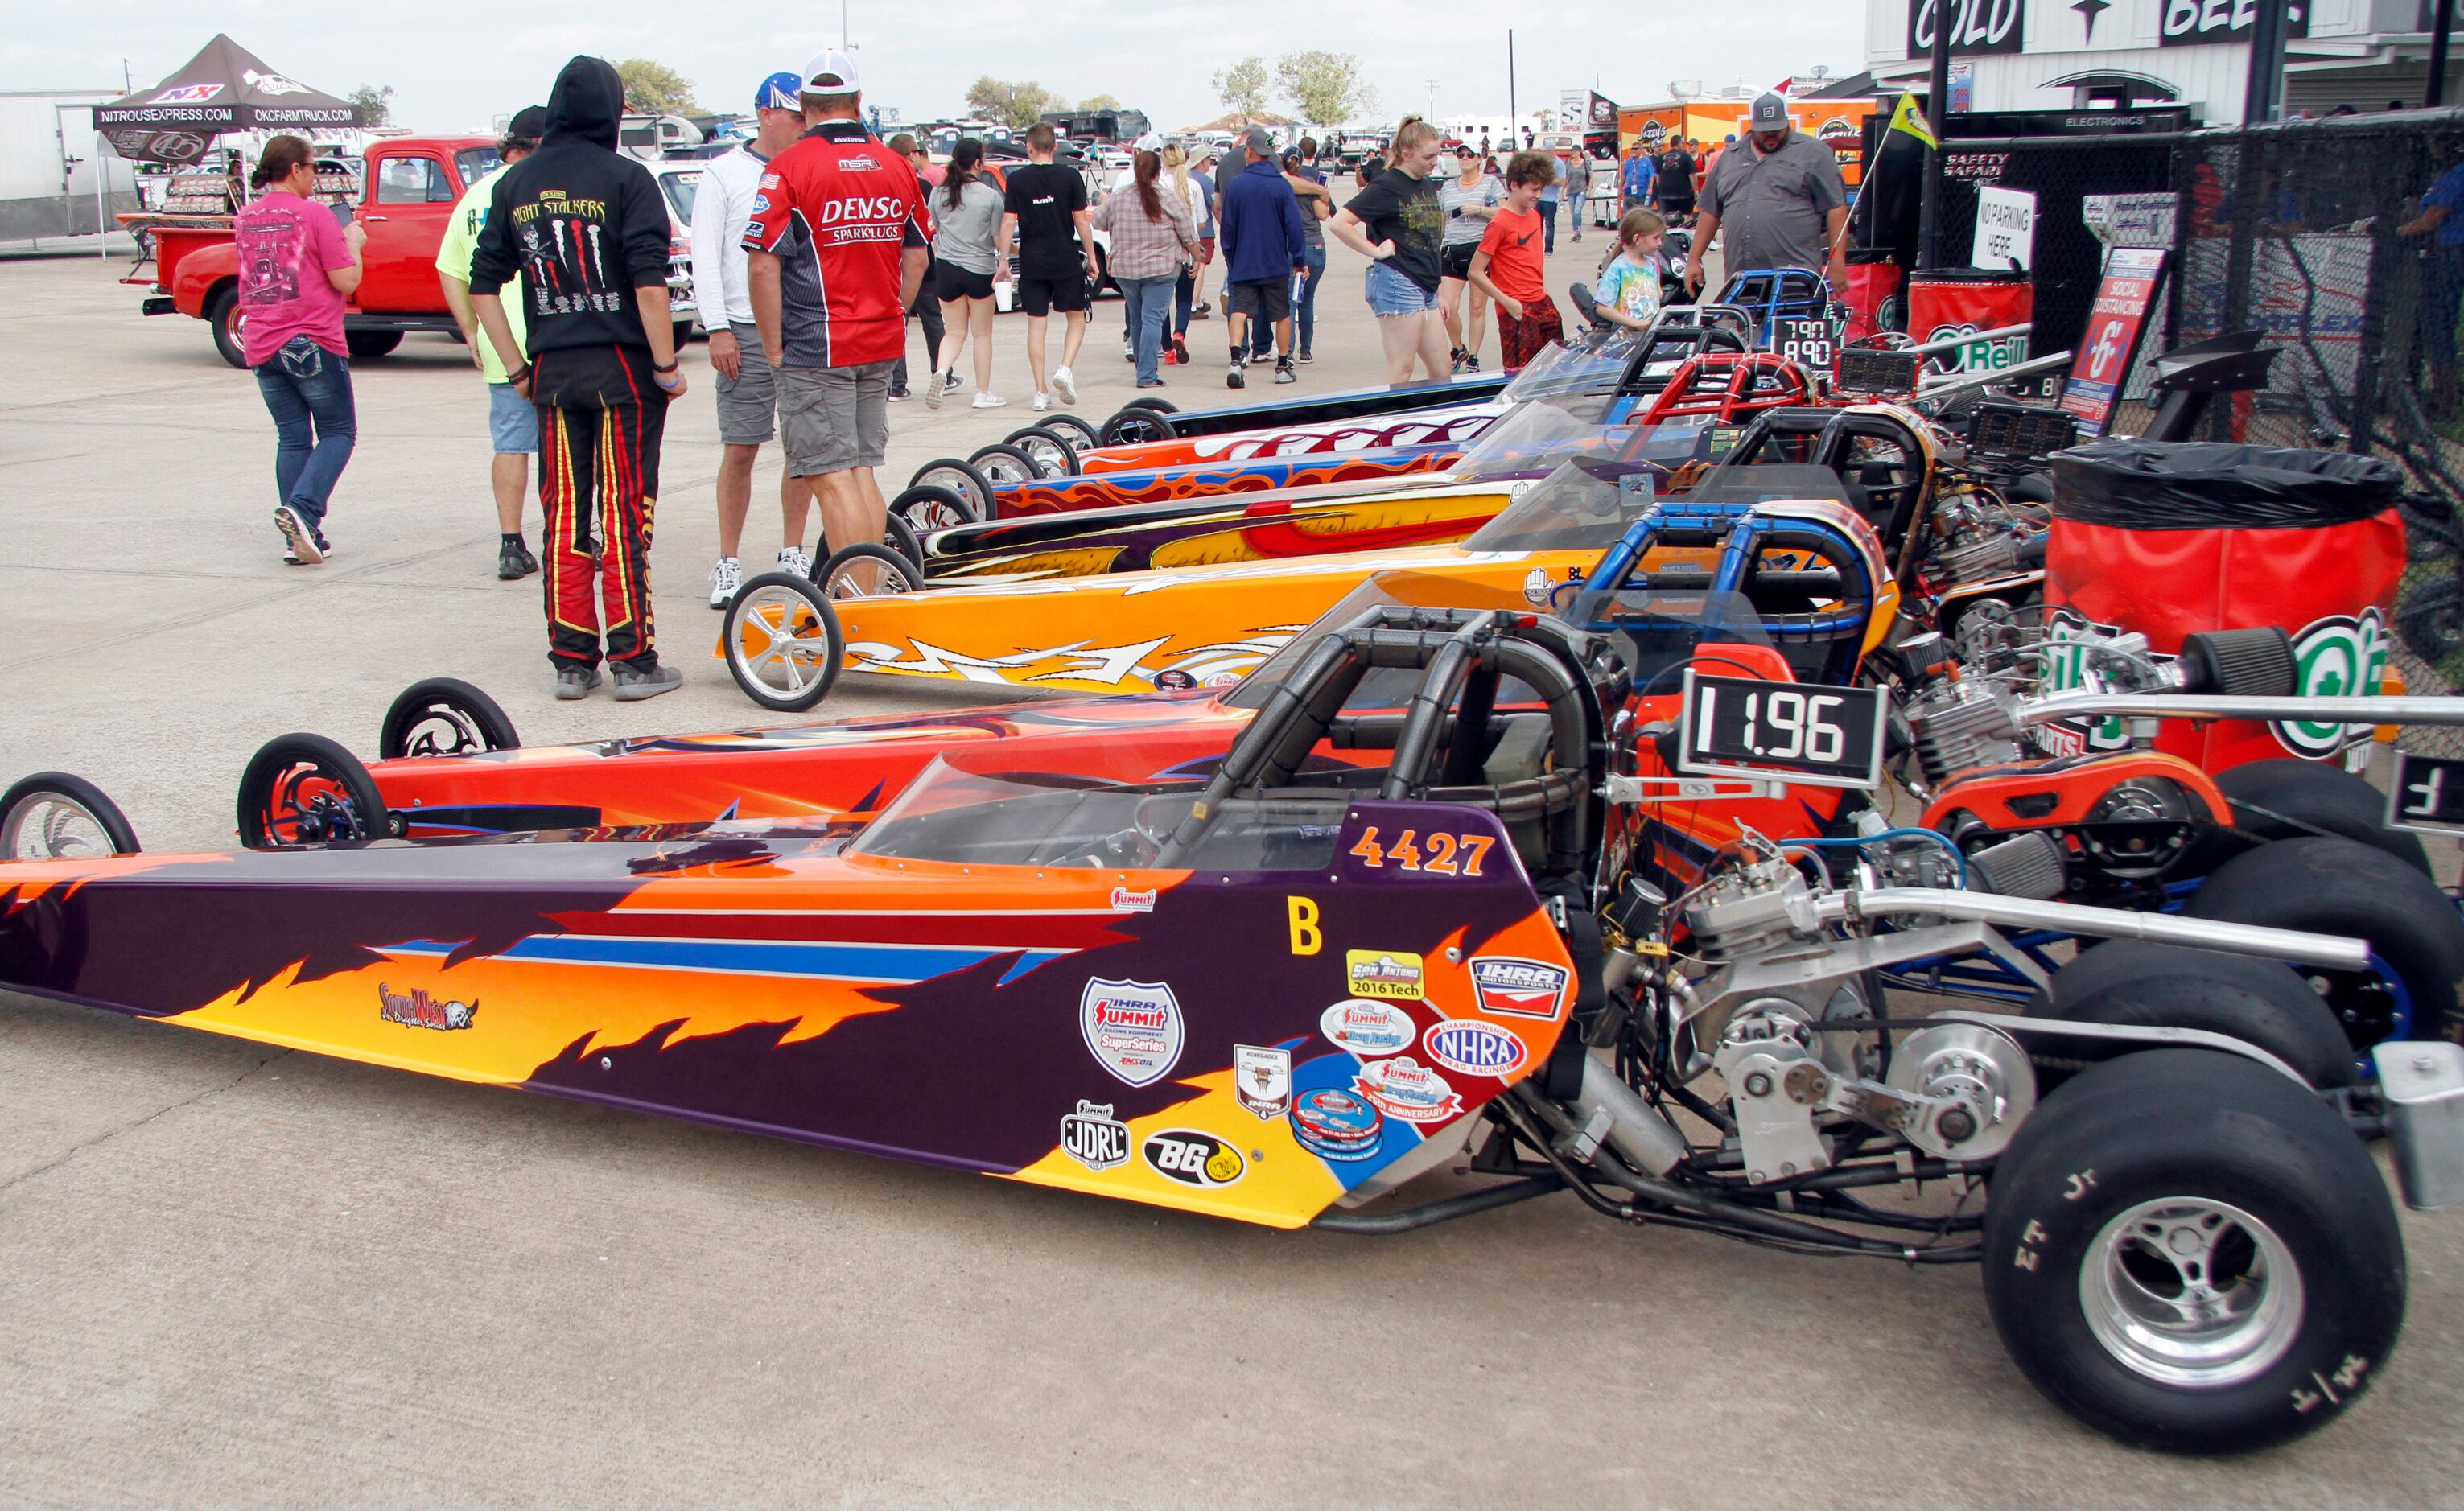 Racing enthusiasts get a close up look at several dragsters on display. The final day of the...